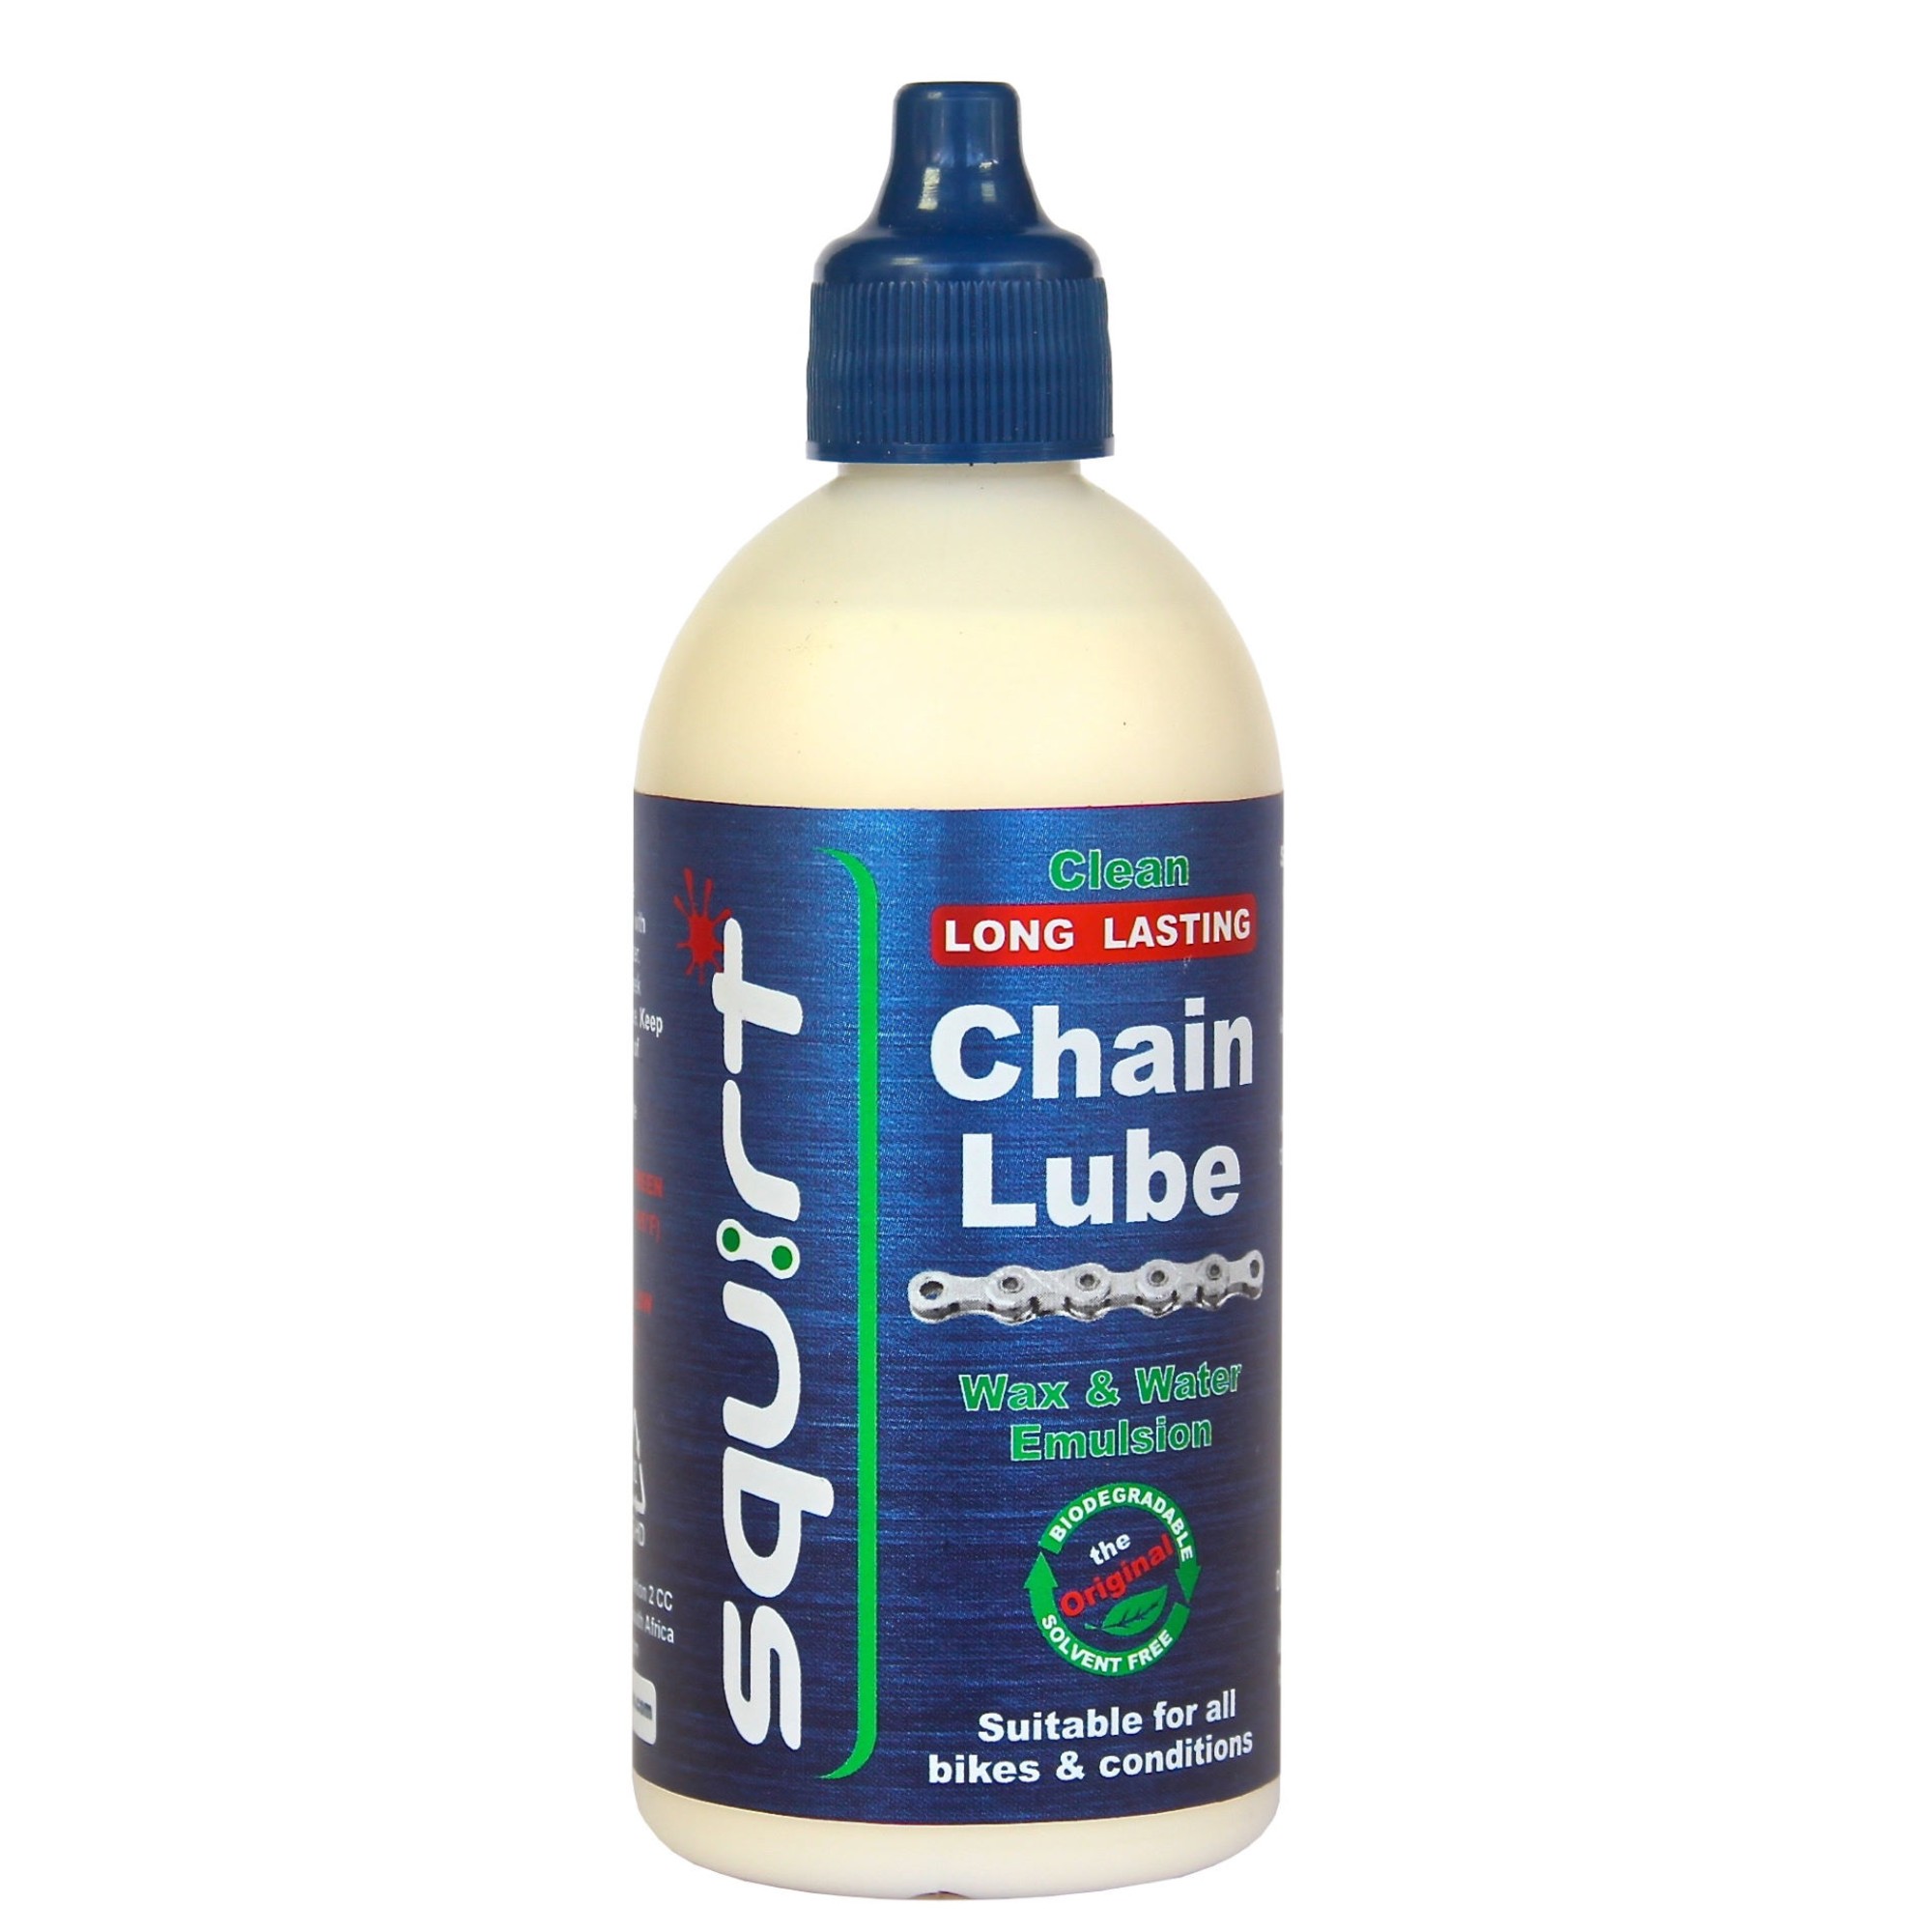 Squirt Chain lube review